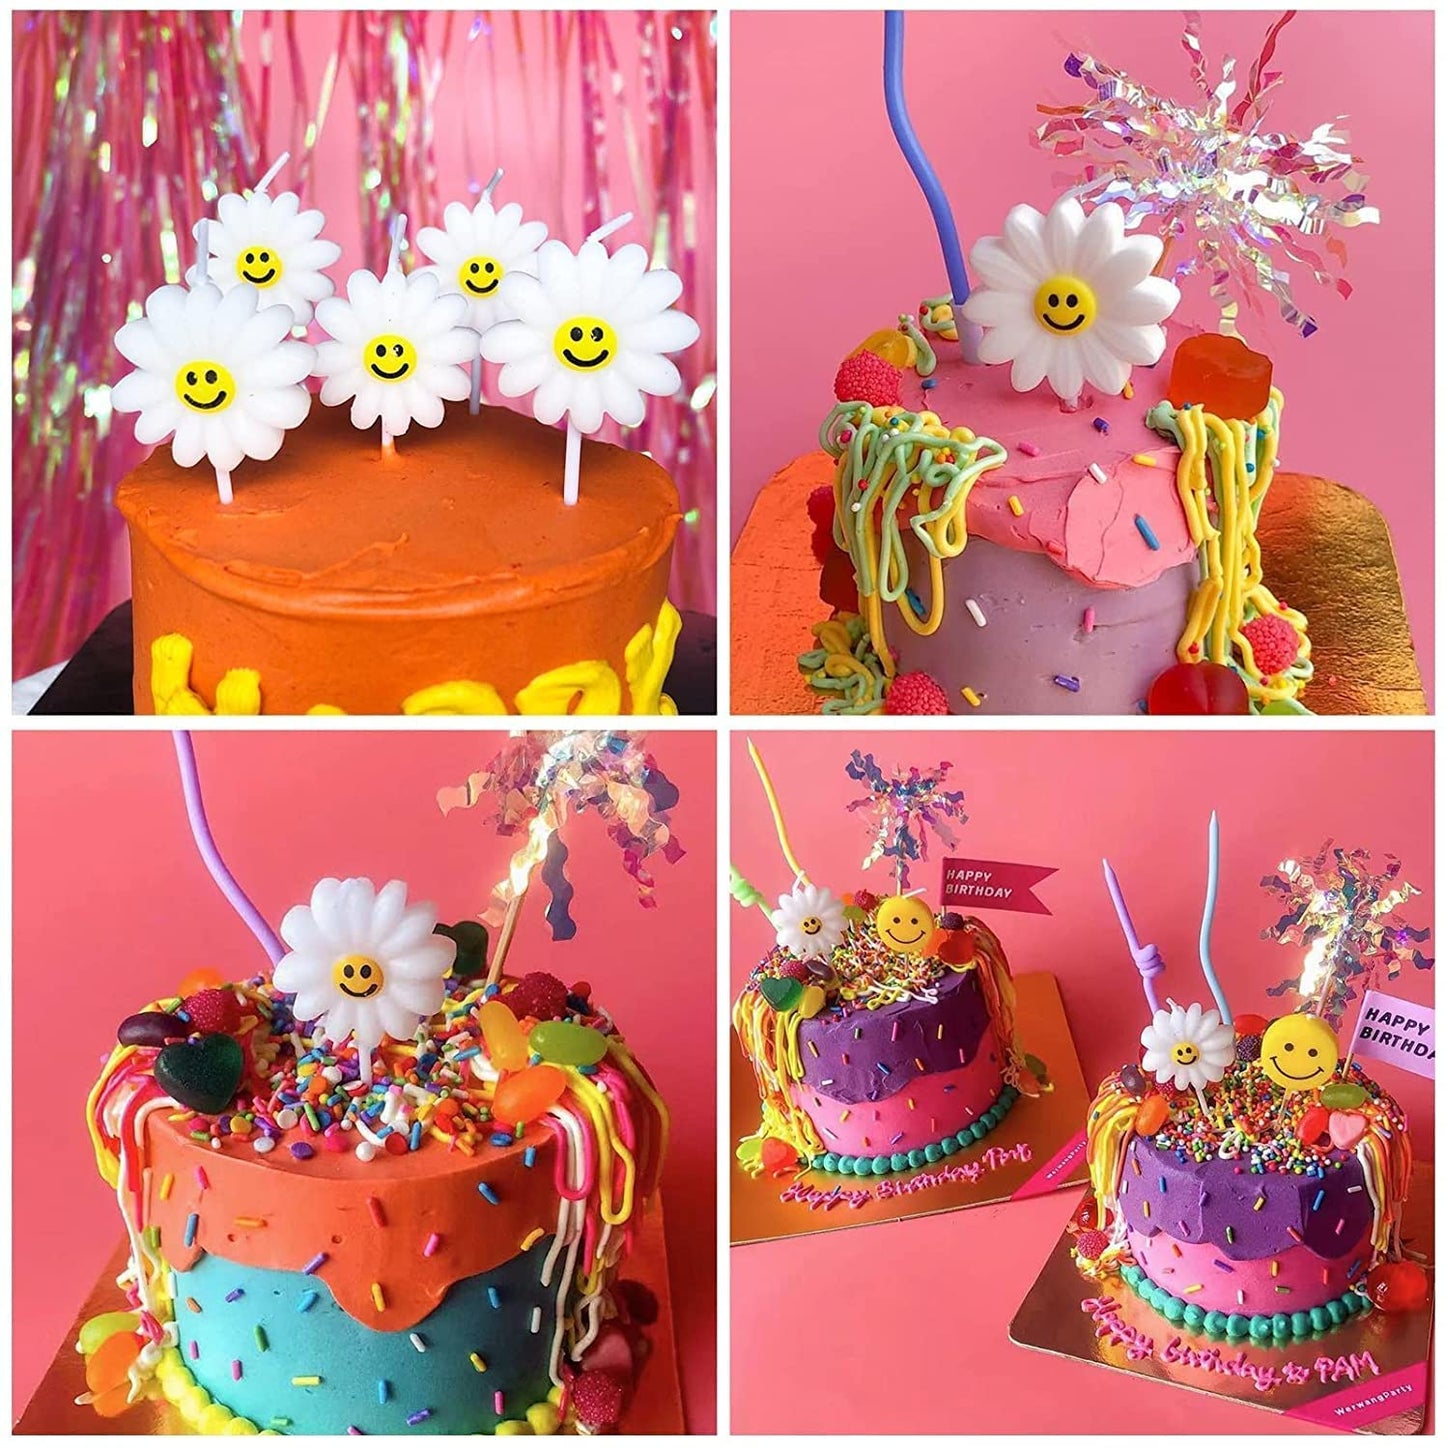 Sunflower Birthday Candles for Cake, Birthday Candles for Girls & Boys, Unique Flower Candle for Cake Decoration with Smiley (Set of 5)